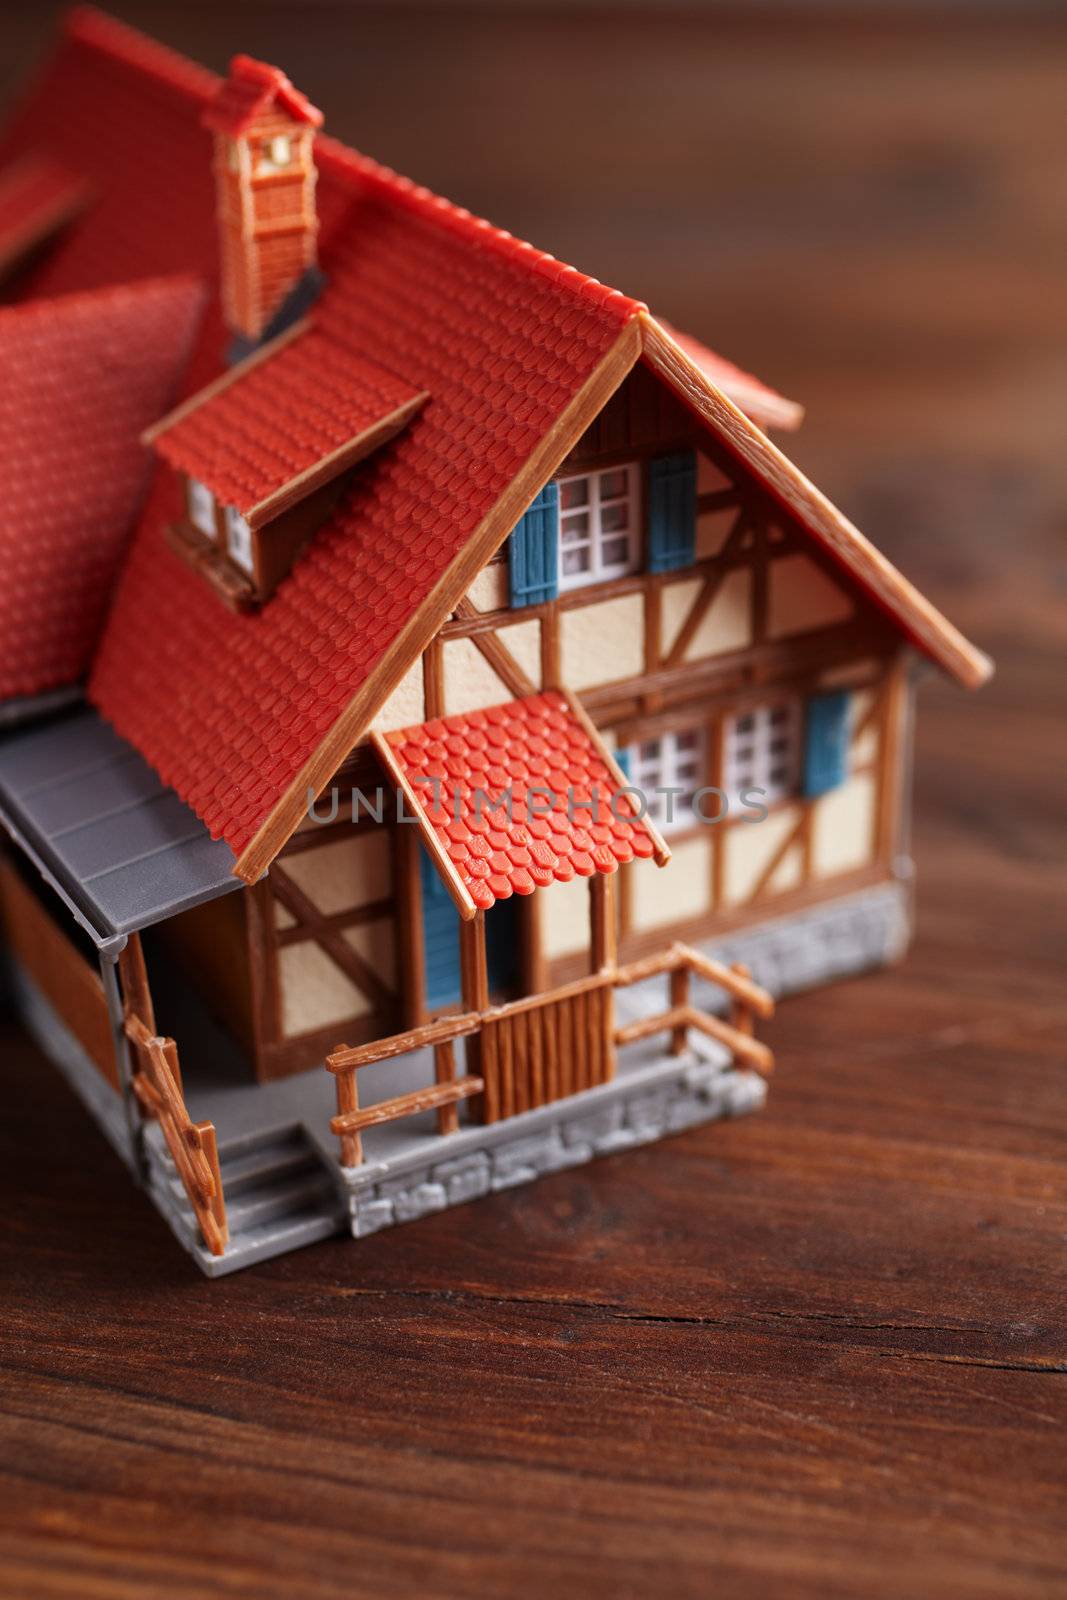 model of house, selective focus on nearest parts